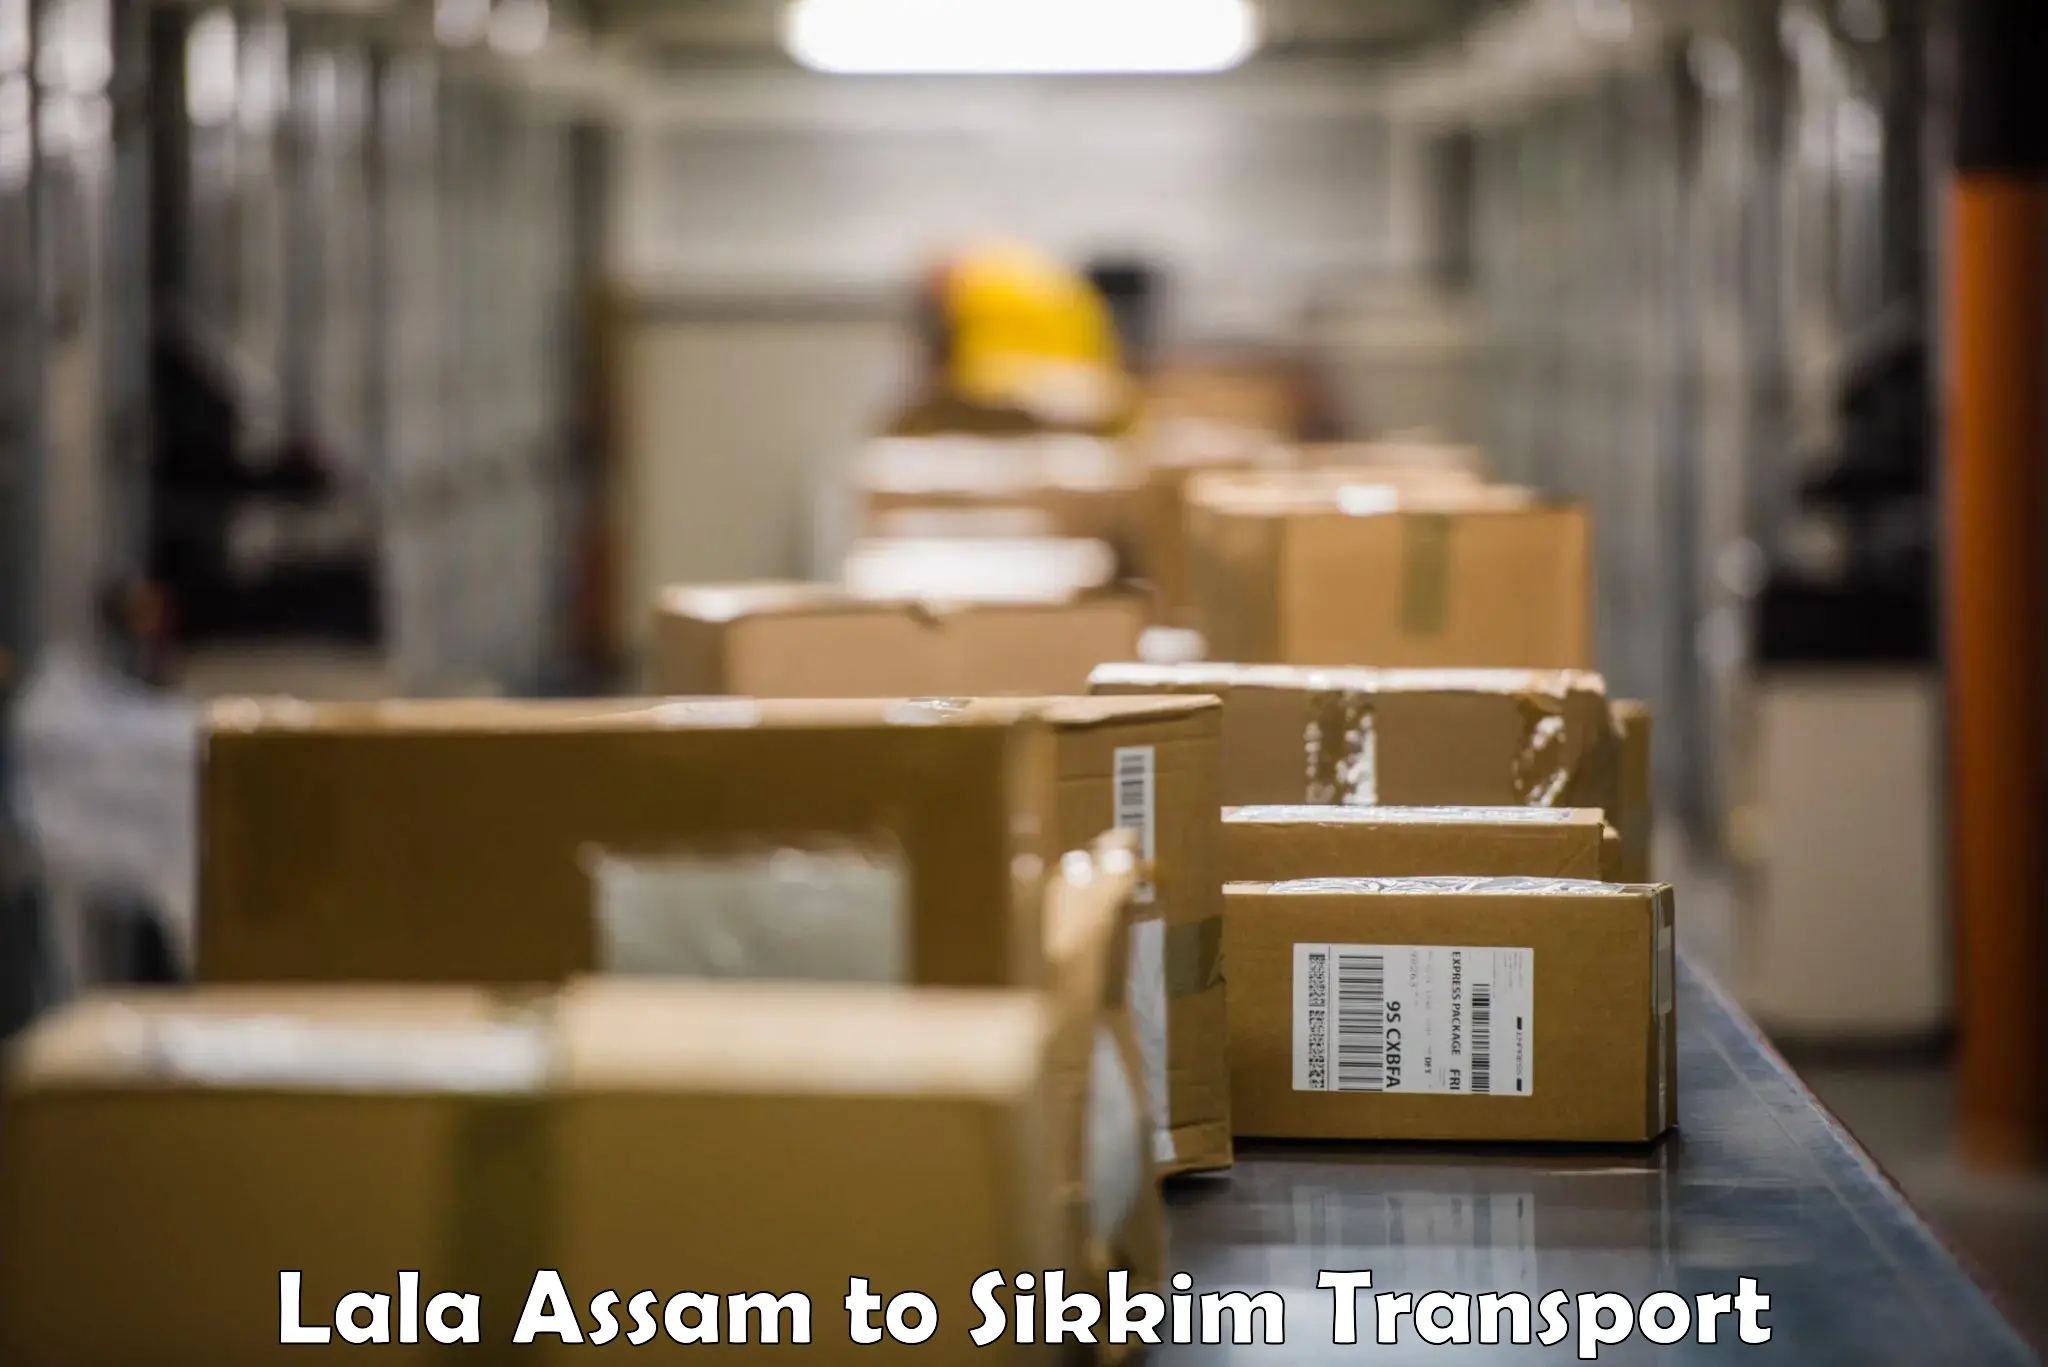 Transport bike from one state to another Lala Assam to North Sikkim